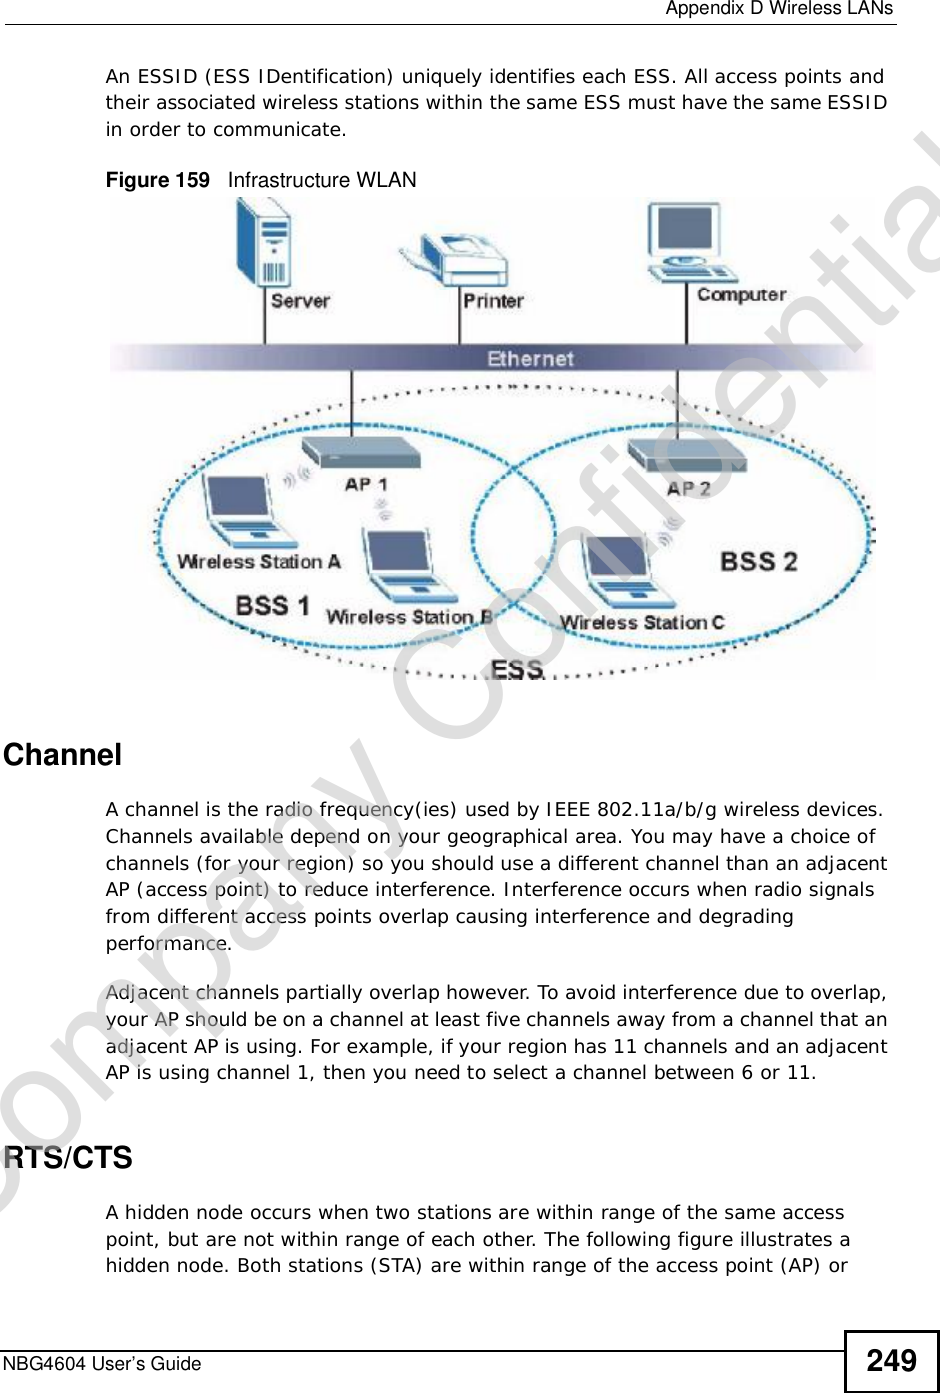  Appendix DWireless LANsNBG4604 User’s Guide 249An ESSID (ESS IDentification) uniquely identifies each ESS. All access points and their associated wireless stations within the same ESS must have the same ESSID in order to communicate.Figure 159   Infrastructure WLANChannelA channel is the radio frequency(ies) used by IEEE 802.11a/b/g wireless devices. Channels available depend on your geographical area. You may have a choice of channels (for your region) so you should use a different channel than an adjacent AP (access point) to reduce interference. Interference occurs when radio signals from different access points overlap causing interference and degrading performance.Adjacent channels partially overlap however. To avoid interference due to overlap, your AP should be on a channel at least five channels away from a channel that an adjacent AP is using. For example, if your region has 11 channels and an adjacent AP is using channel 1, then you need to select a channel between 6 or 11.RTS/CTSA hidden node occurs when two stations are within range of the same access point, but are not within range of each other. The following figure illustrates a hidden node. Both stations (STA) are within range of the access point (AP) or Company Confidential